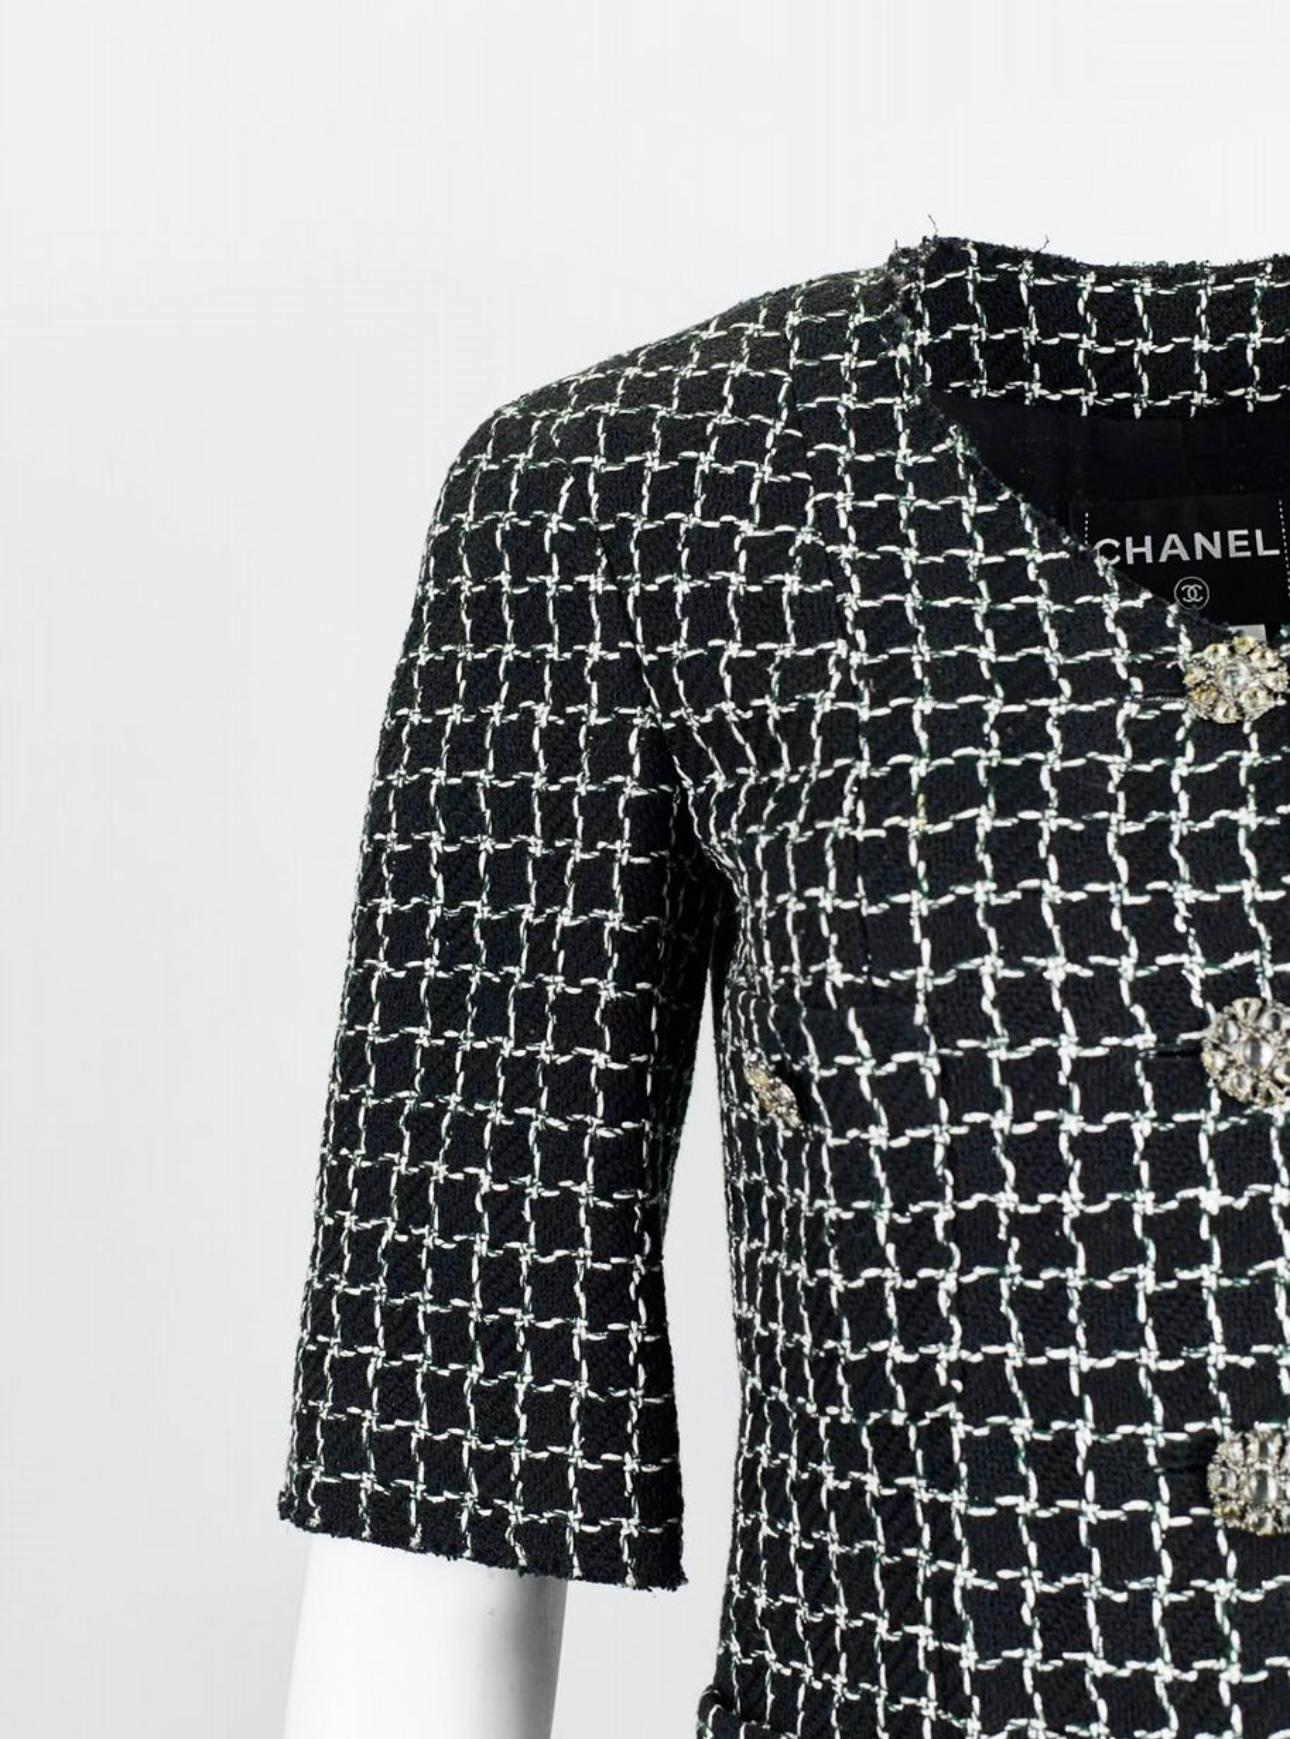 Timeless Chanel black tweed jacket with check pattern and CC logo jewel Gripoix buttons -- from Ad Campaign of 2013 Pre Spring Collection -- as seen on model Stella Tennant.
- black silk lining
Size mark 36 FR. Pristine condition.